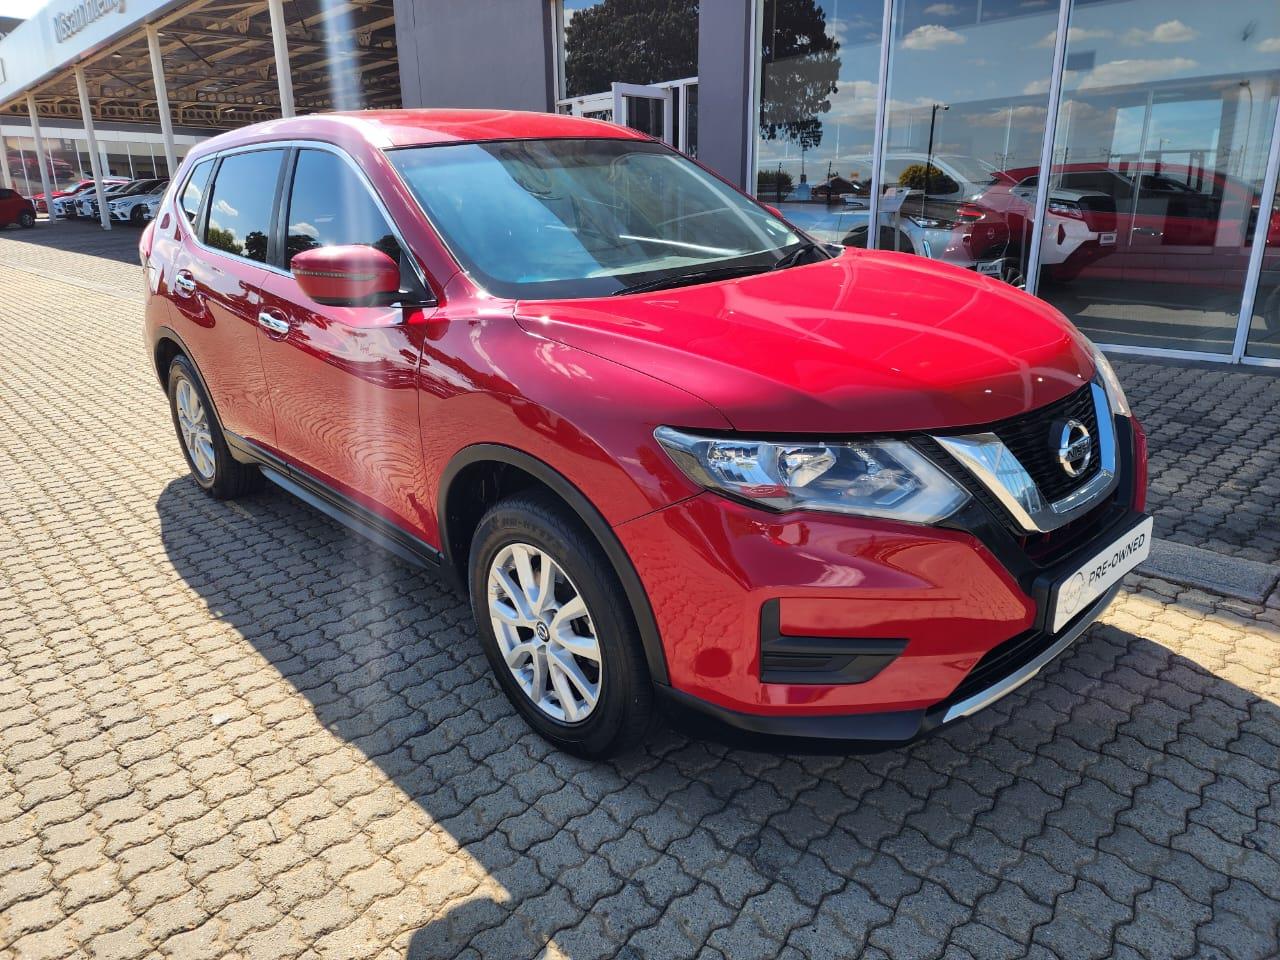 2018 Nissan X-Trail 1.6dCi Visia For Sale